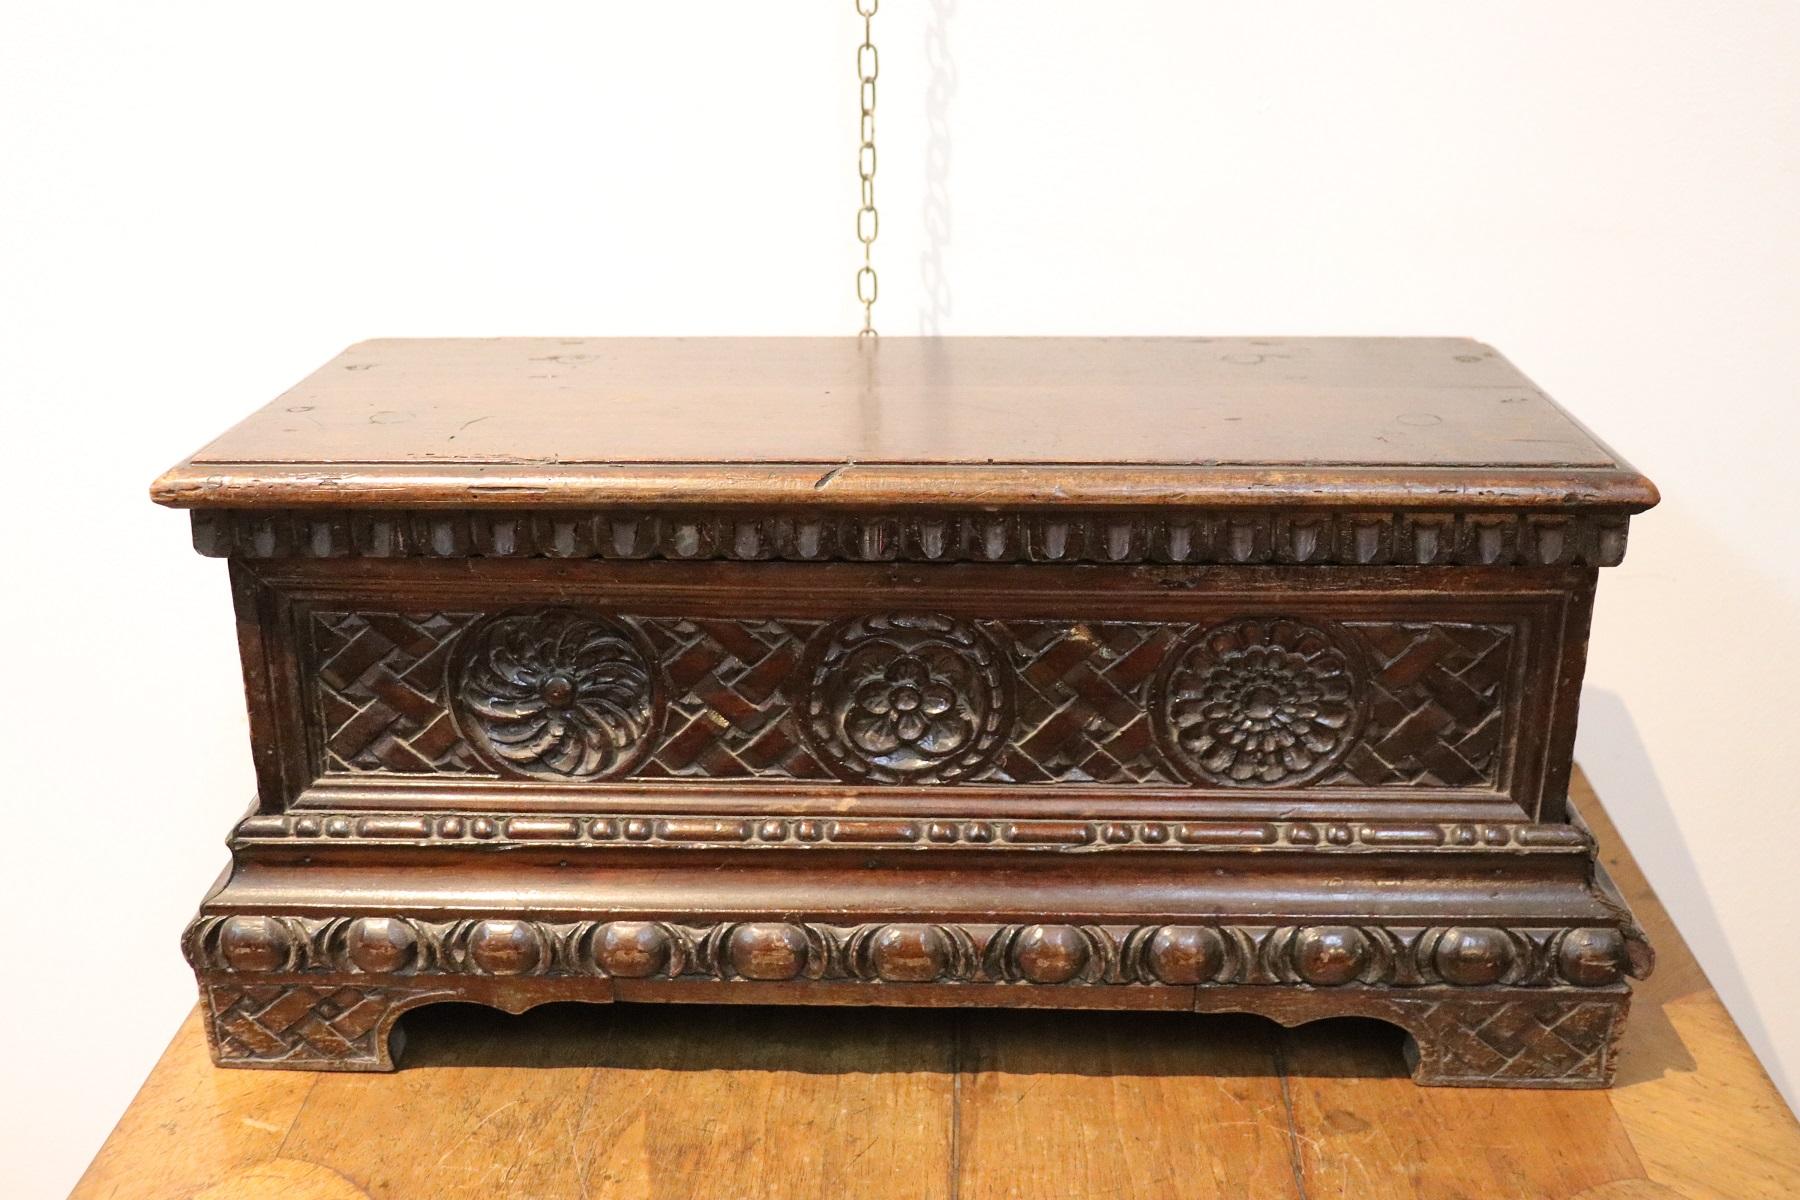 Rare and fine quality 19th century Italian Renaissance walnut carved miniature blanket chest or coffer. Fine carving in walnut wood on the front, beautiful antique patina walnut wood. This miniature blanket chest is ideal for decorating your home